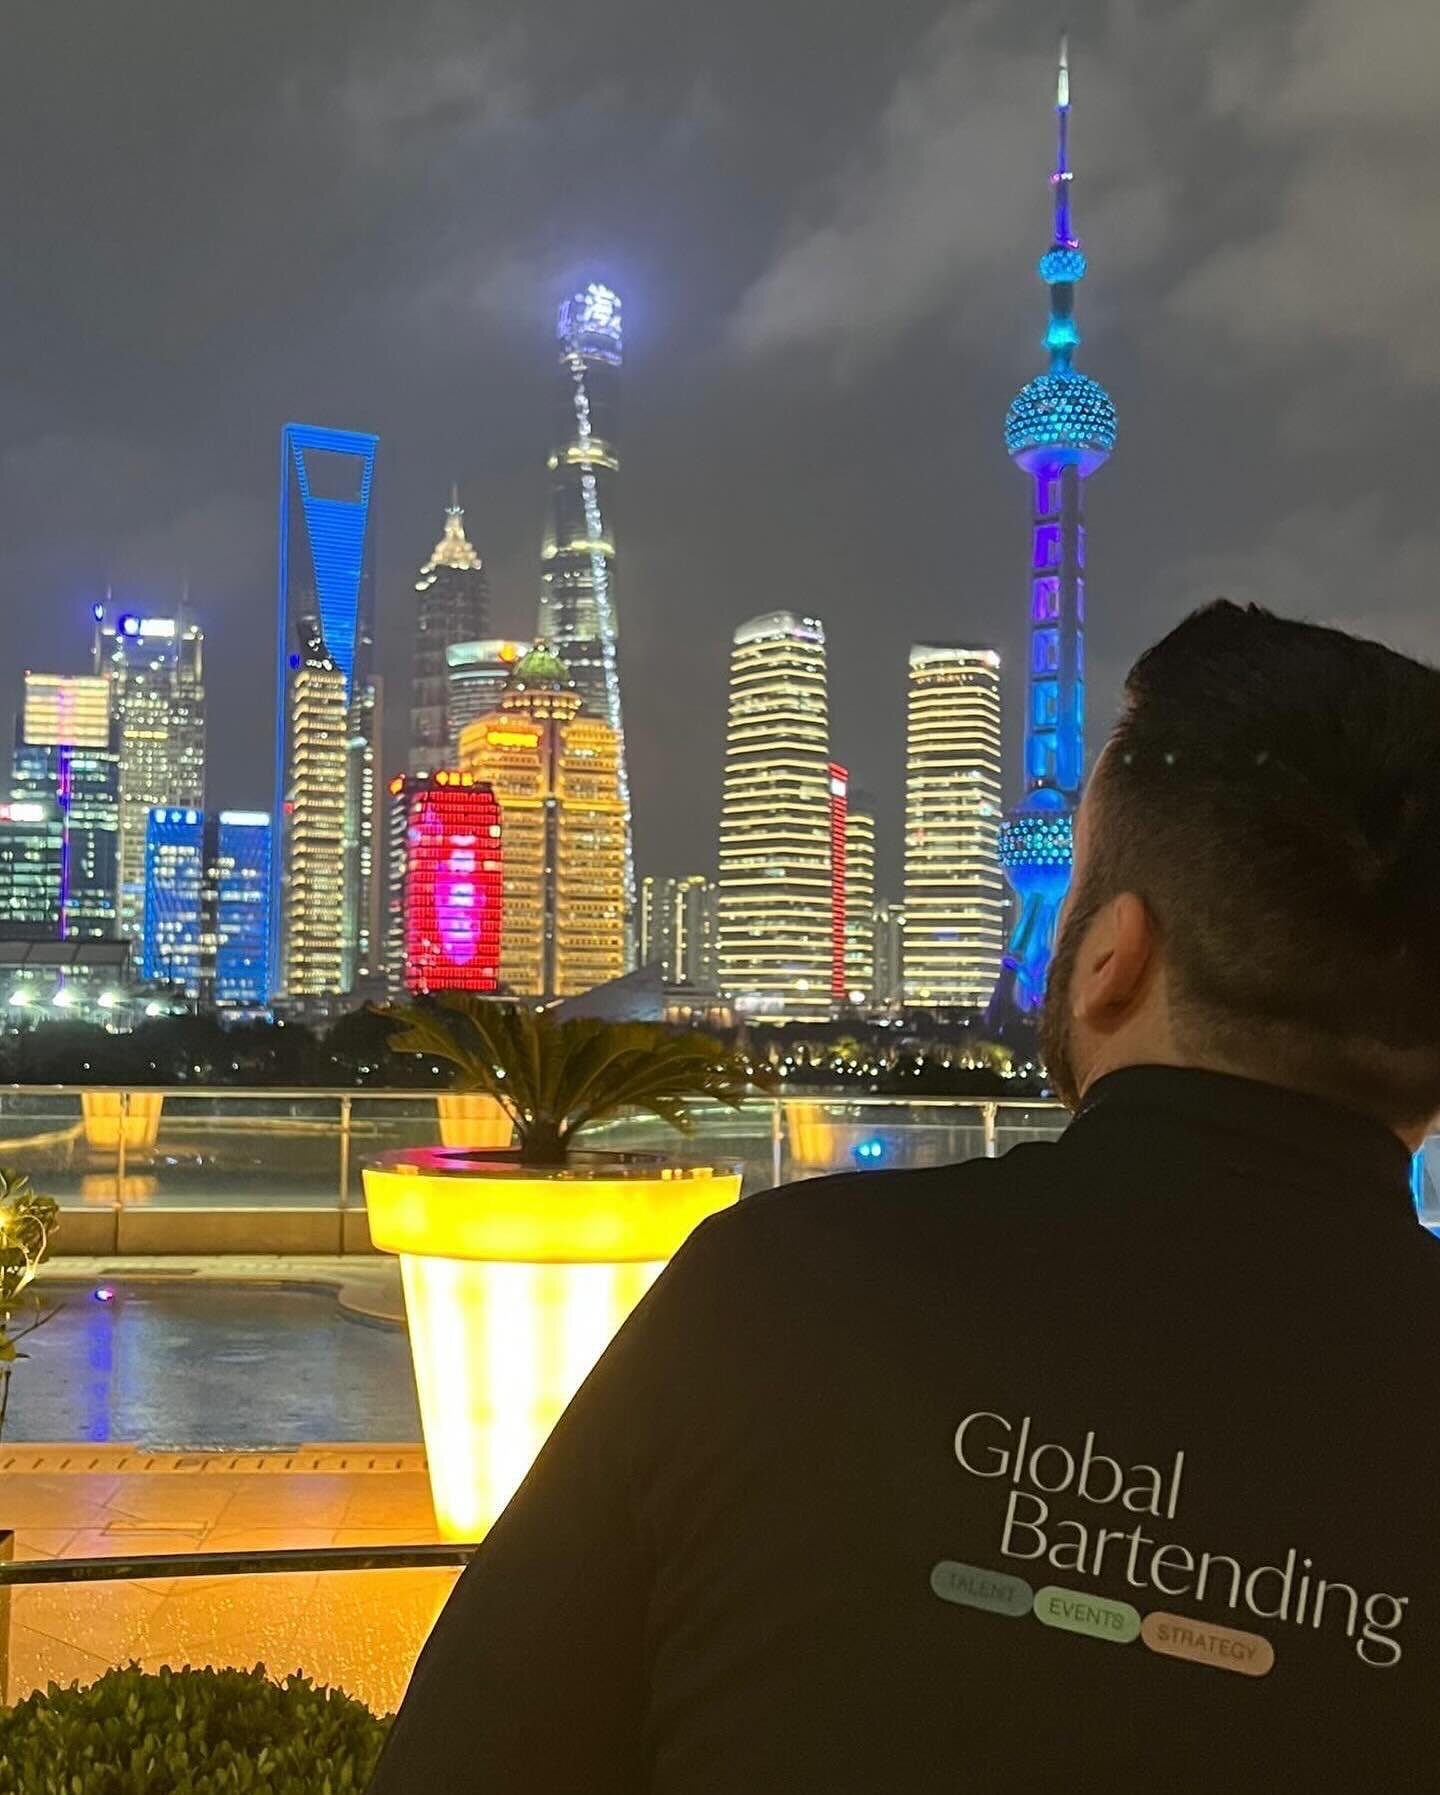 The Global Bartending team have landed in Shanghai!

Time to get planning on design, production, content &amp; logistics for all things @worldclass when we take the finals here in September.

Watch this space!